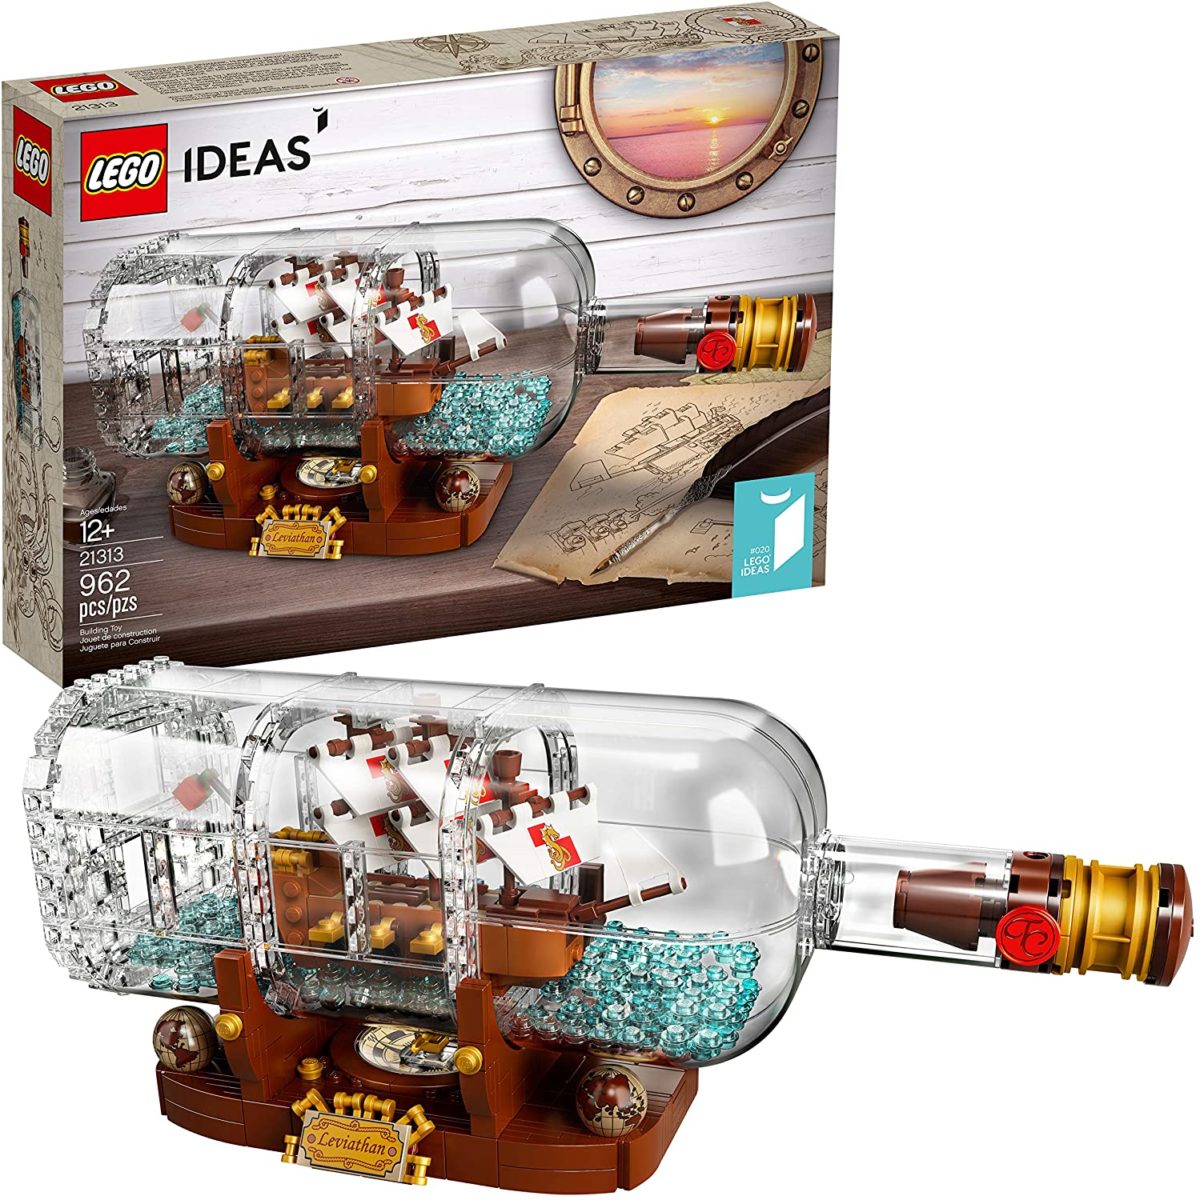 LEGO Ideas Ship in a Bottle - Top Toys and Gifts for Eight Year Old Boys 1